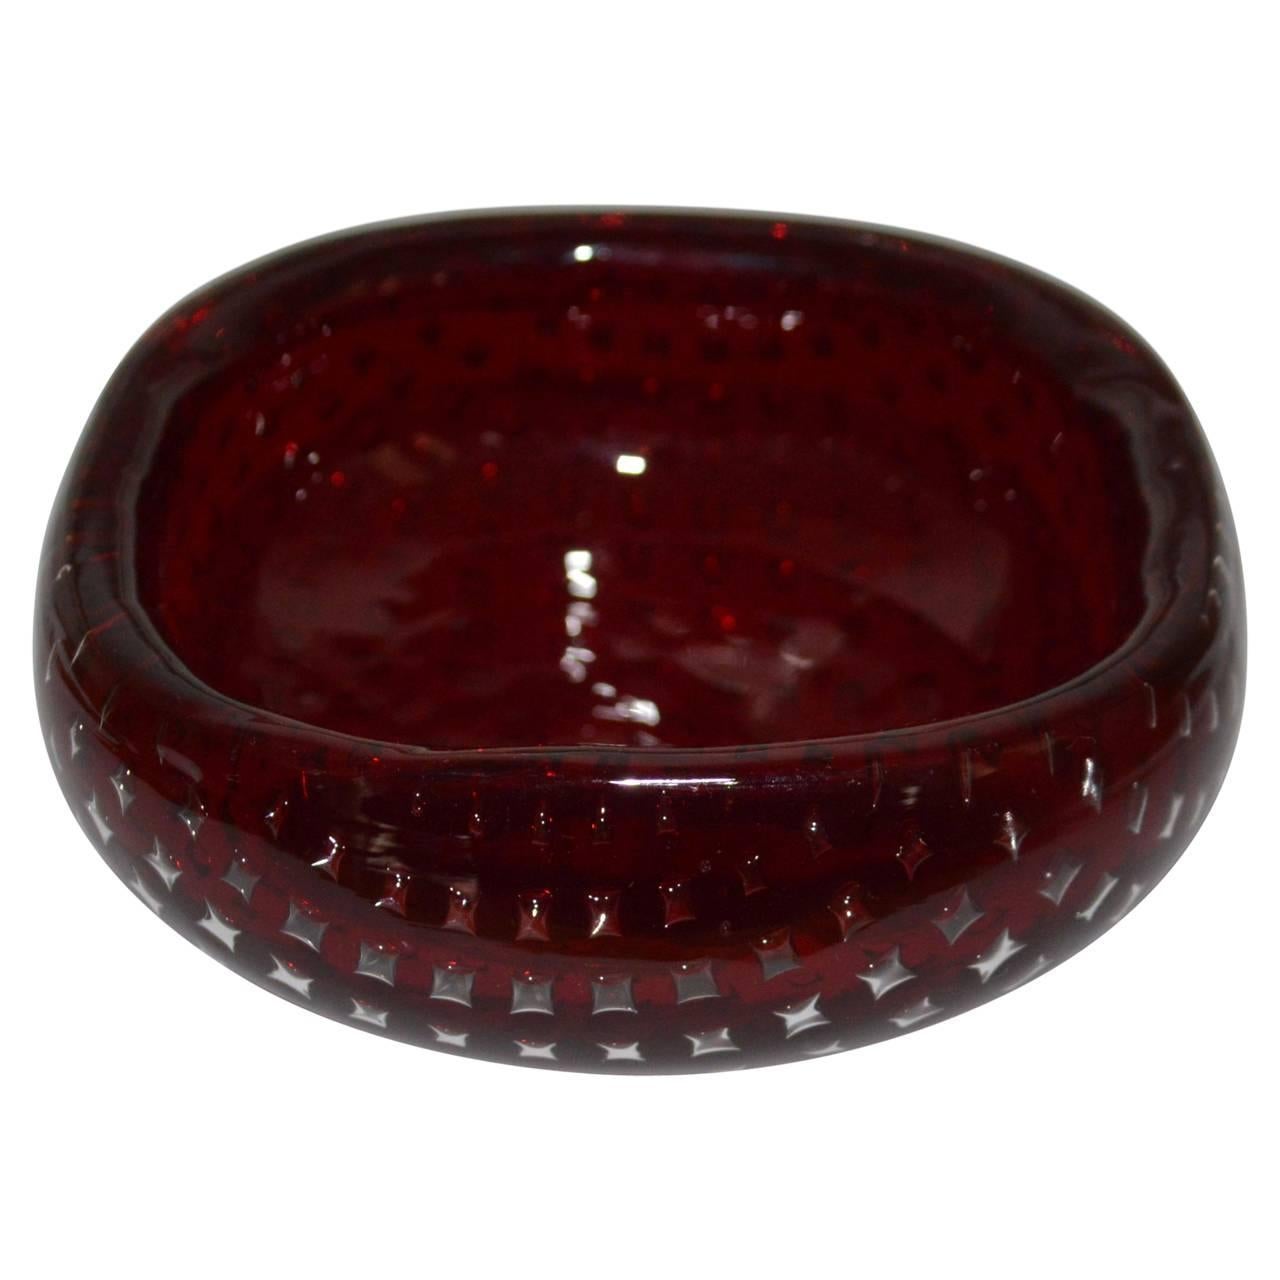 Very nice Murano glass bowl with controlled bubble pattern. The bowl is square but with rounded corners.